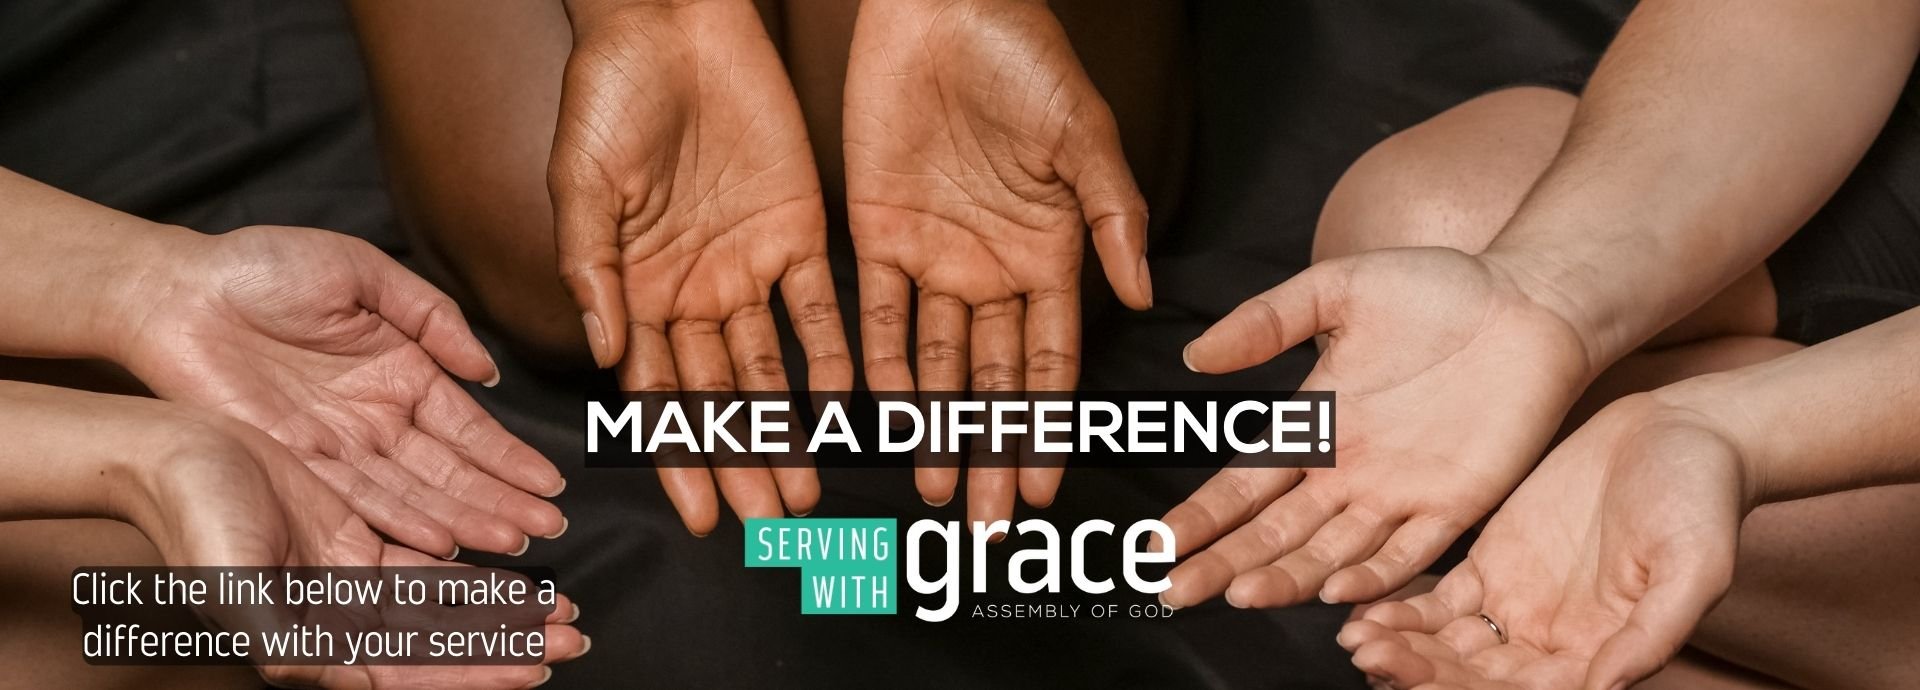 Serving With Grace (1920 × 690 px)(1).jpg